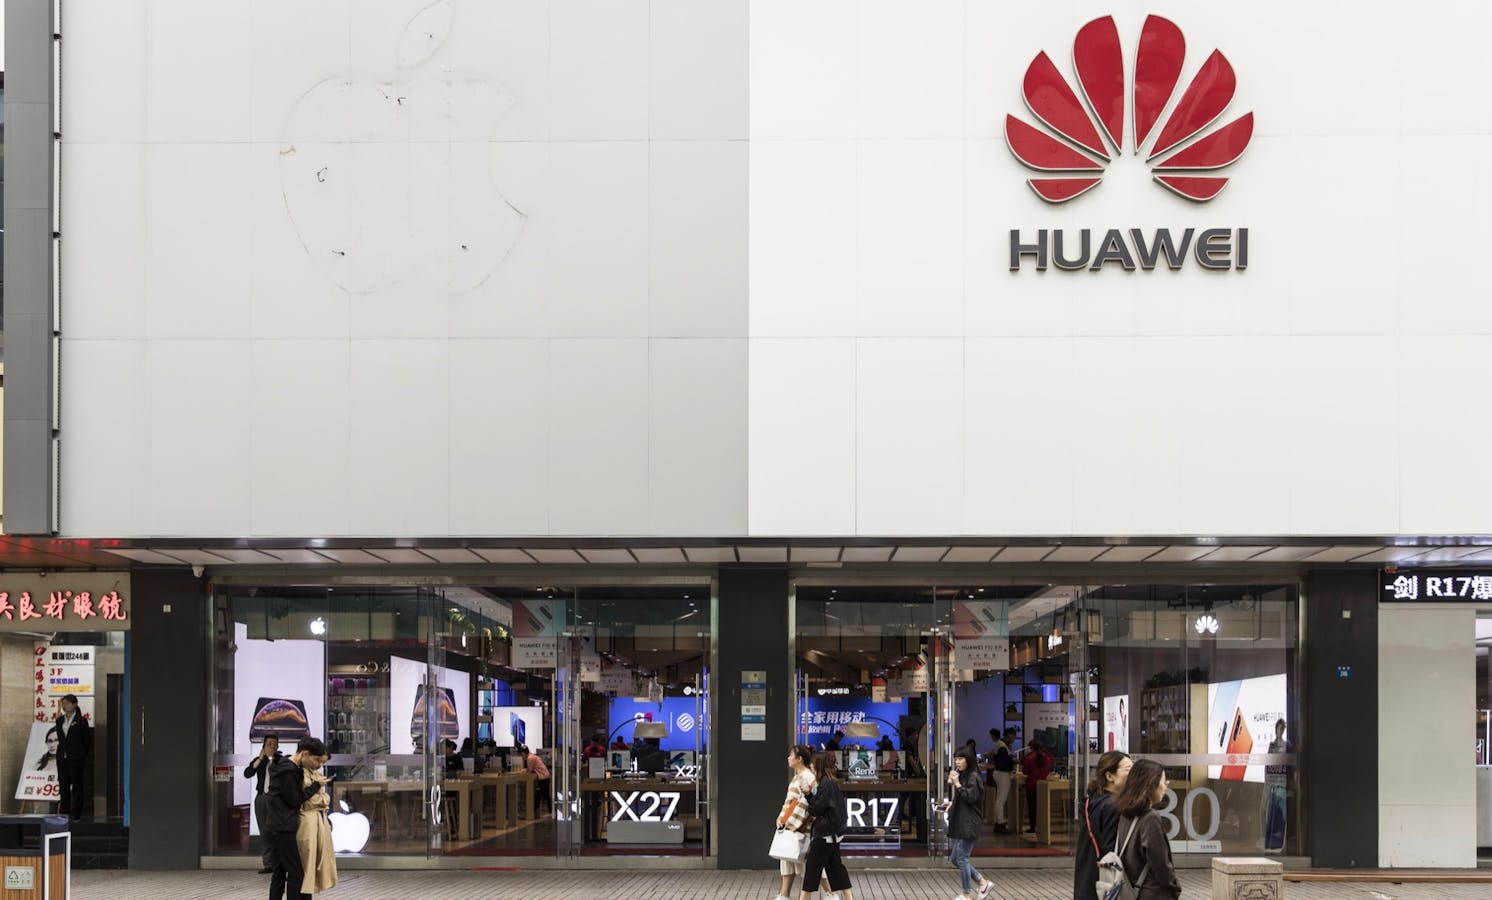 A Huawei store. Photo by Bloomberg.